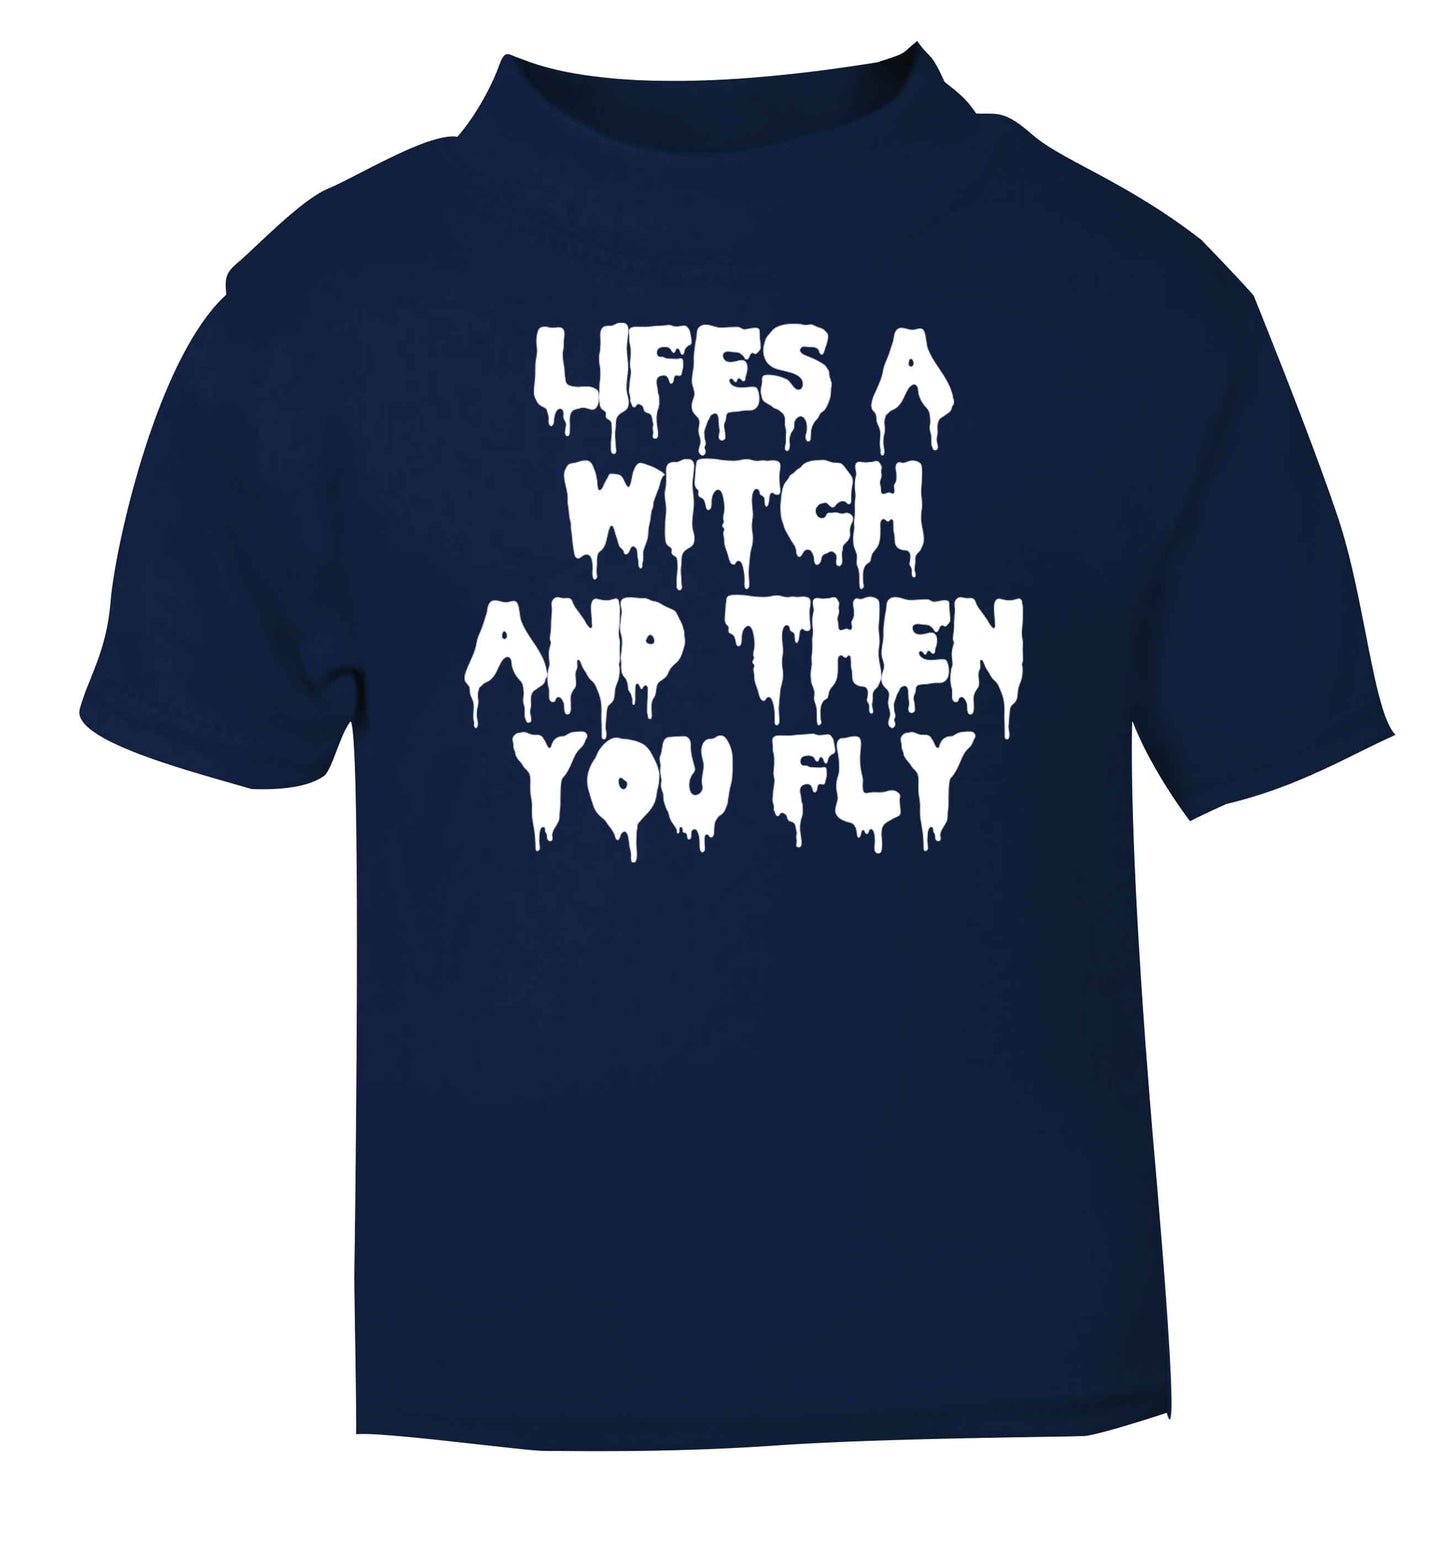 Life's a witch and then you fly navy baby toddler Tshirt 2 Years